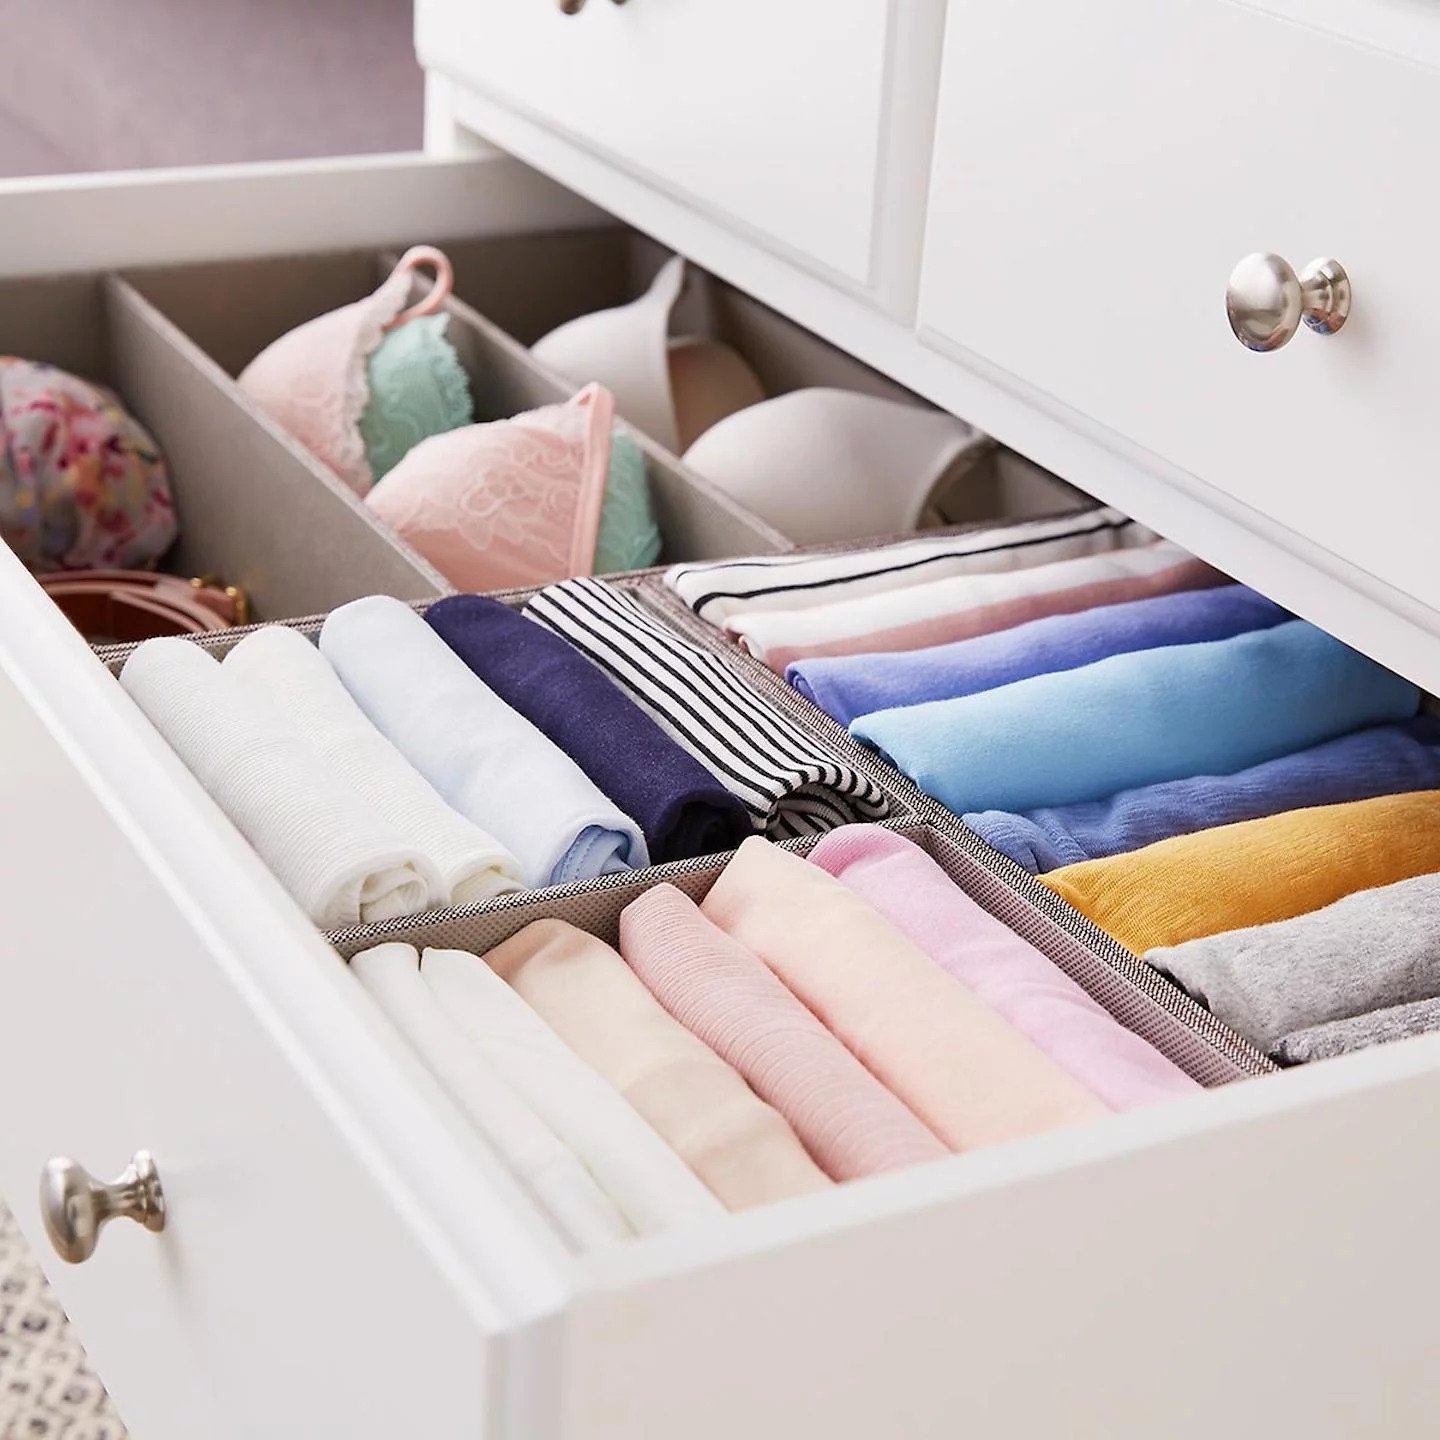 How To Store Scarves In A Drawer